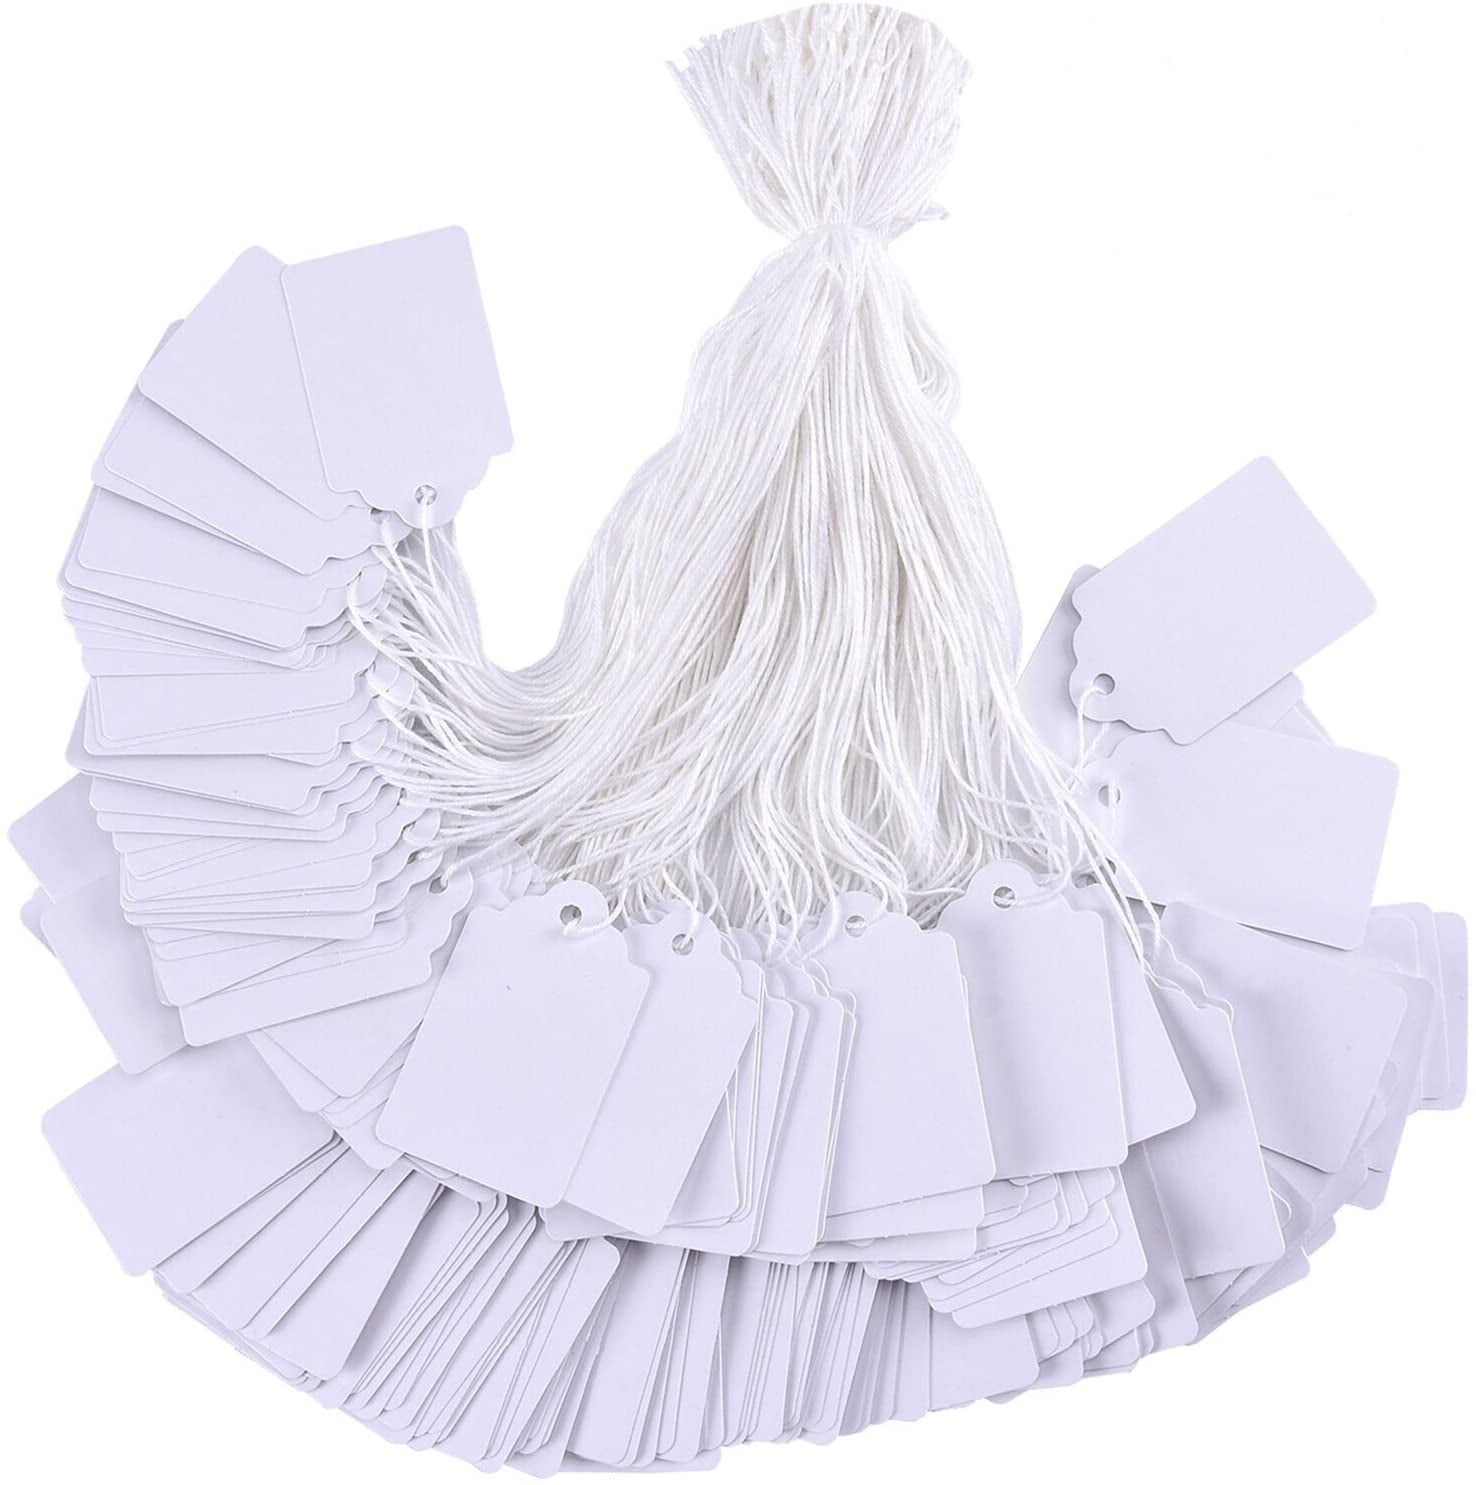 100pcs Price Tag With String Attached White Marking Tag Gift Tag With String  Paper Price Label